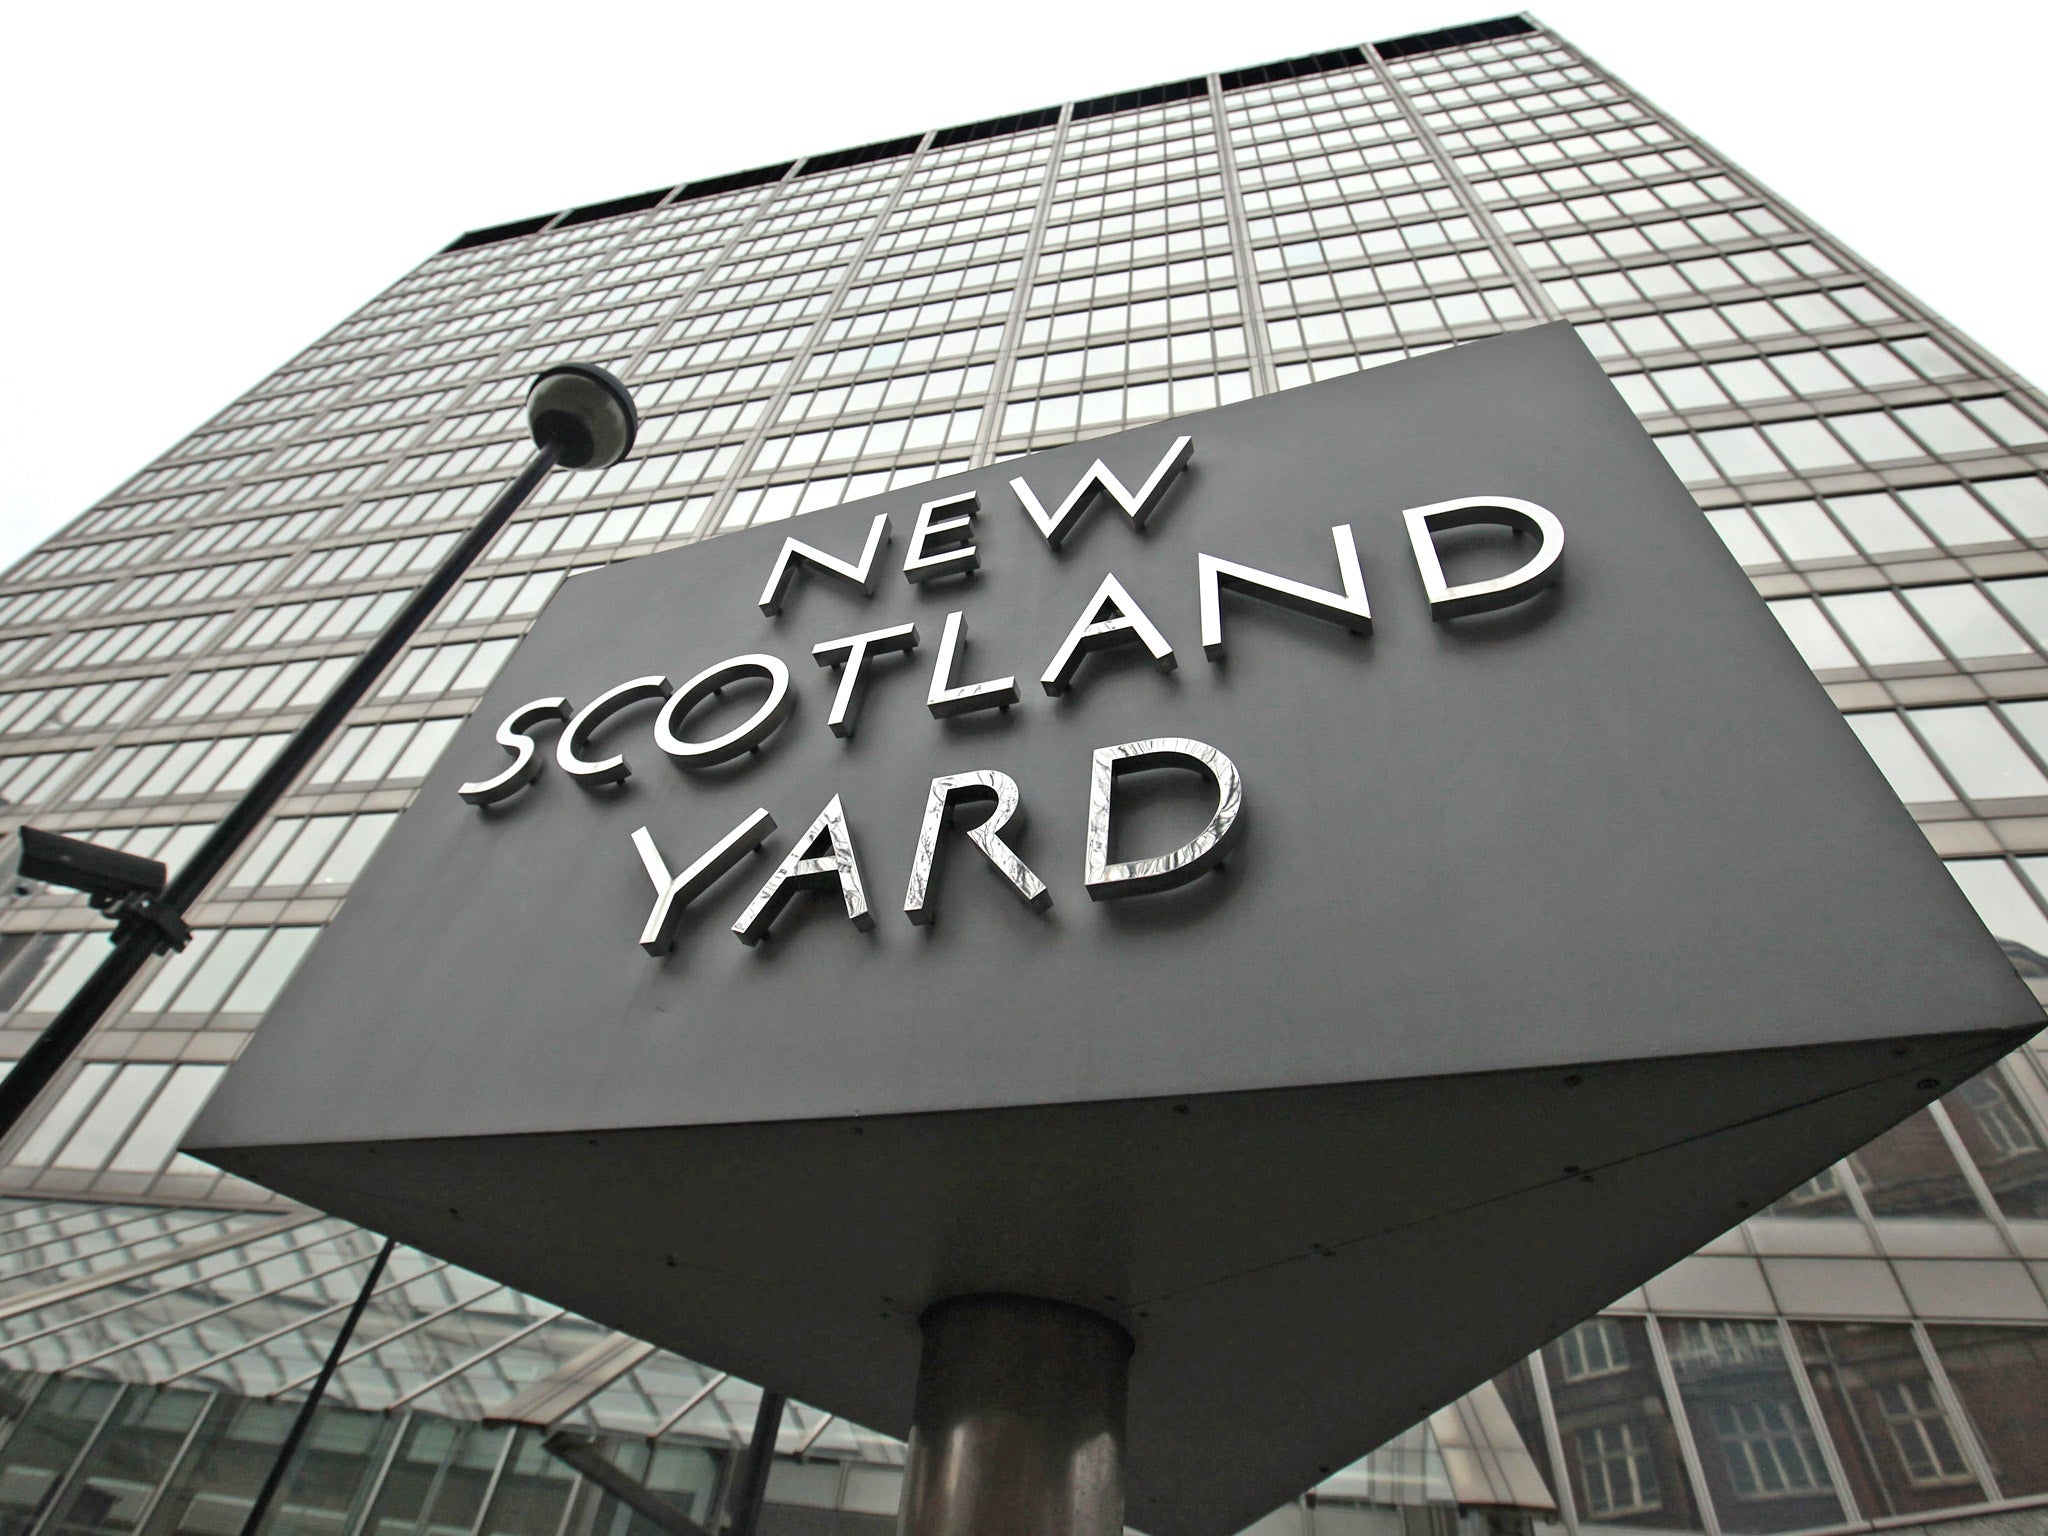 A Scotland Yard officer who faced a misconduct inquiry after blowing the whistle on manipulated crime statistics has quit just days before his hearing saying that his trust in the force had been destroyed